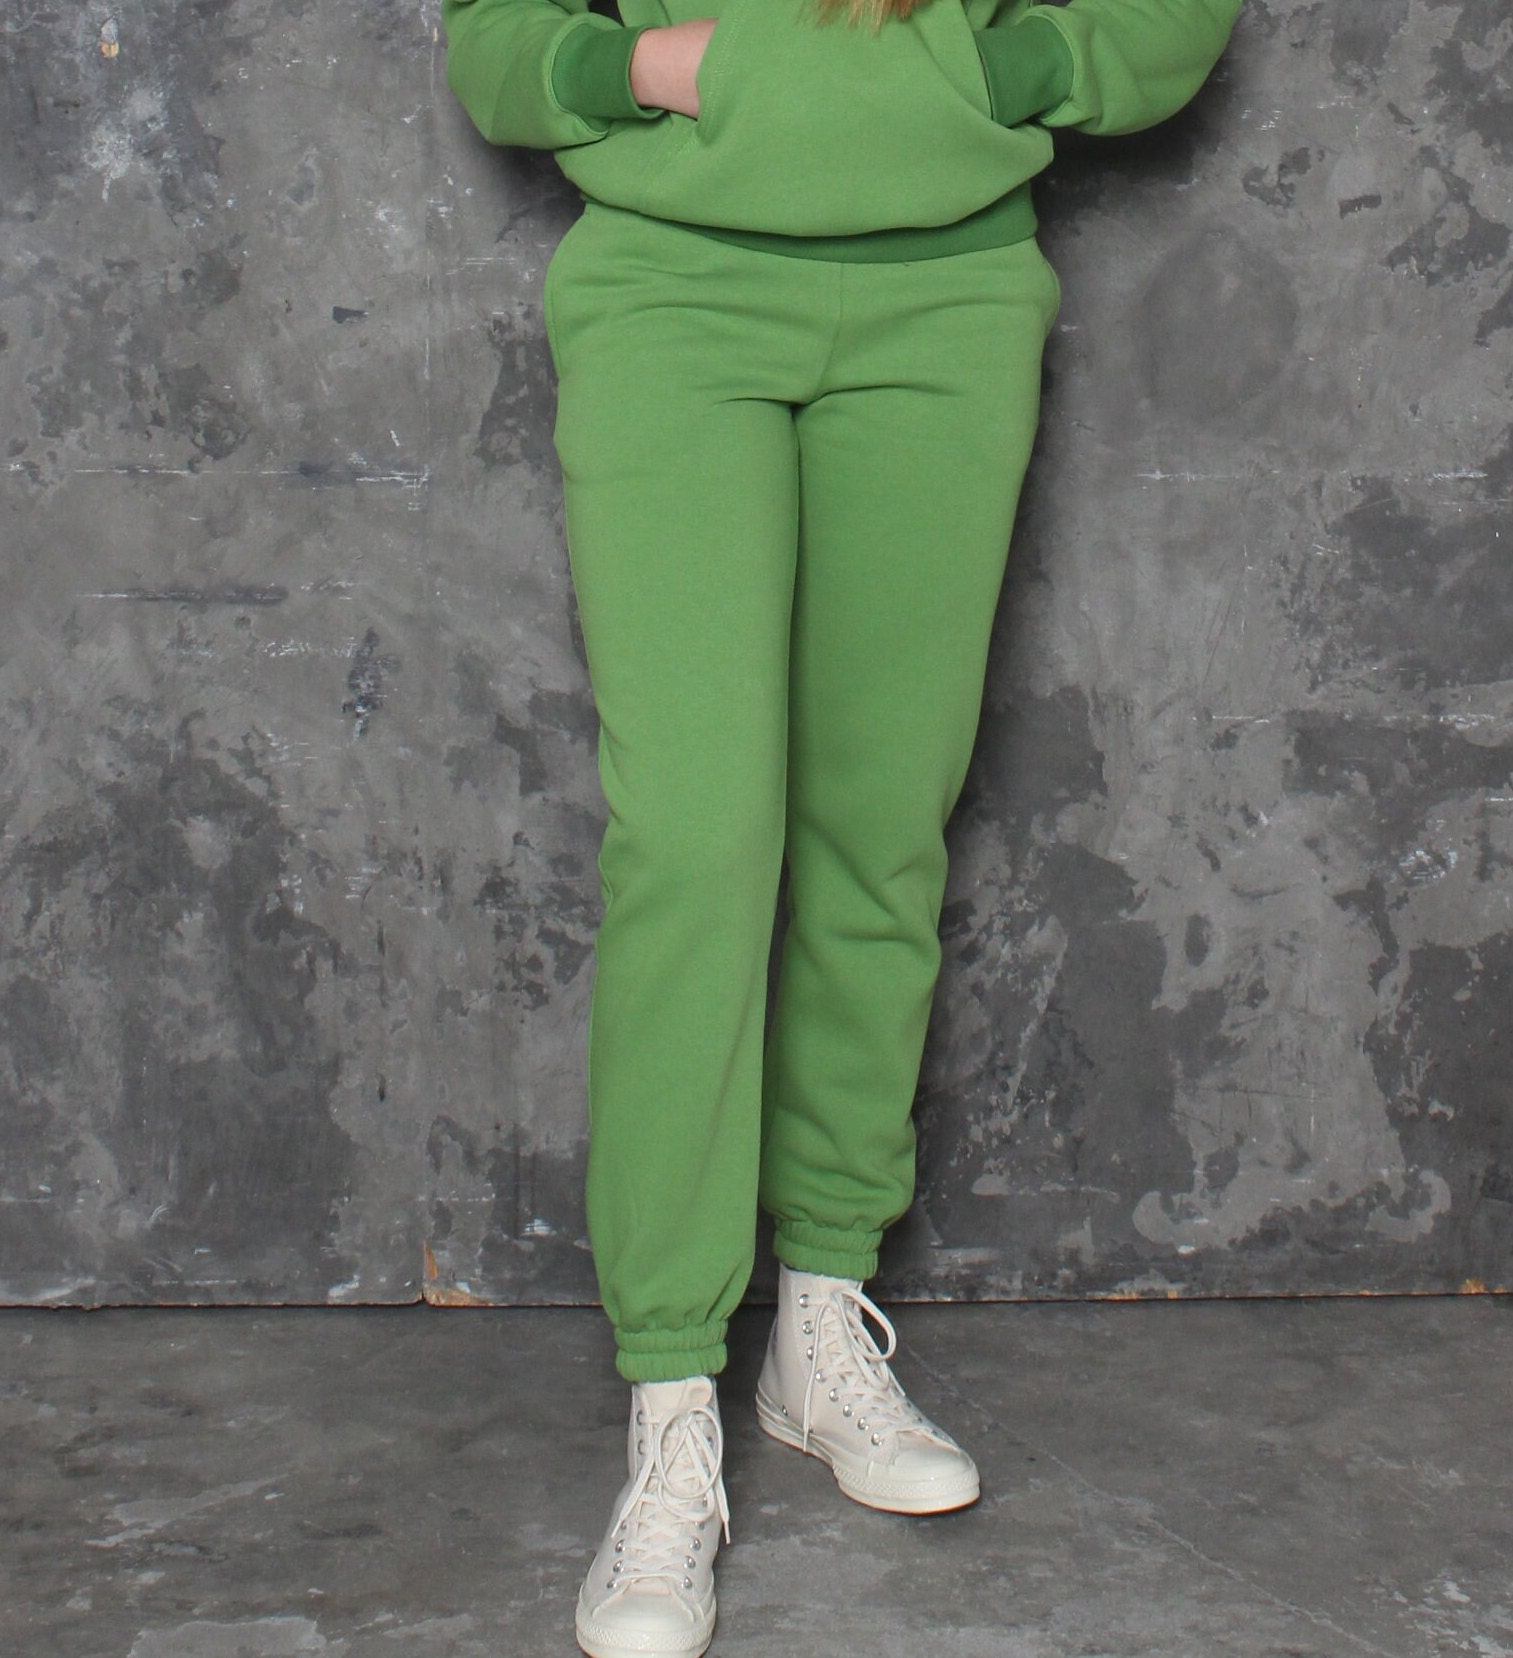 Green Jogging Pants. Cuffed Ladies Joggers With Pockets and